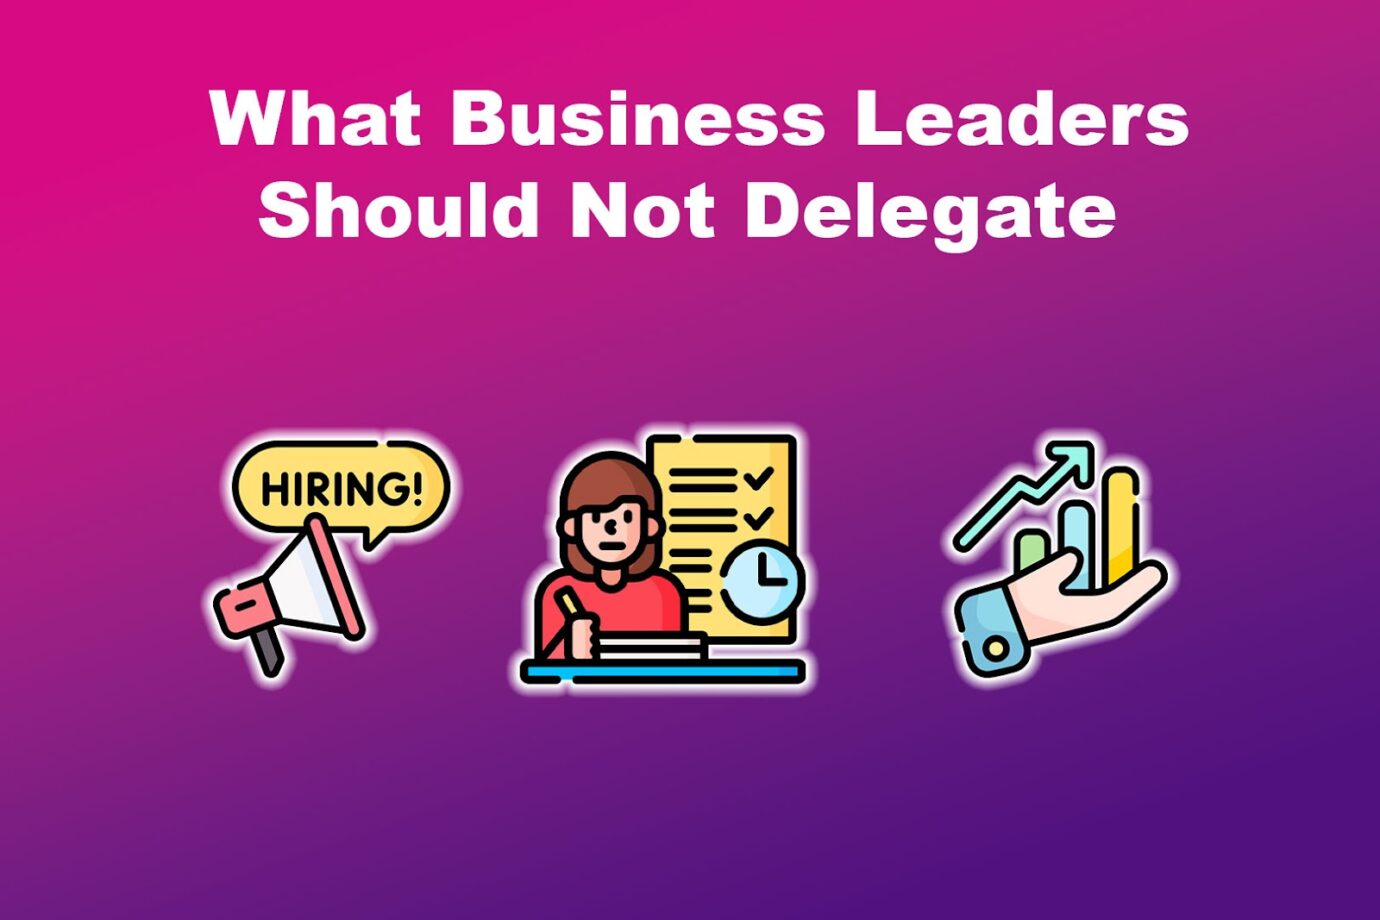 What Business Leaders Should Not Delegate